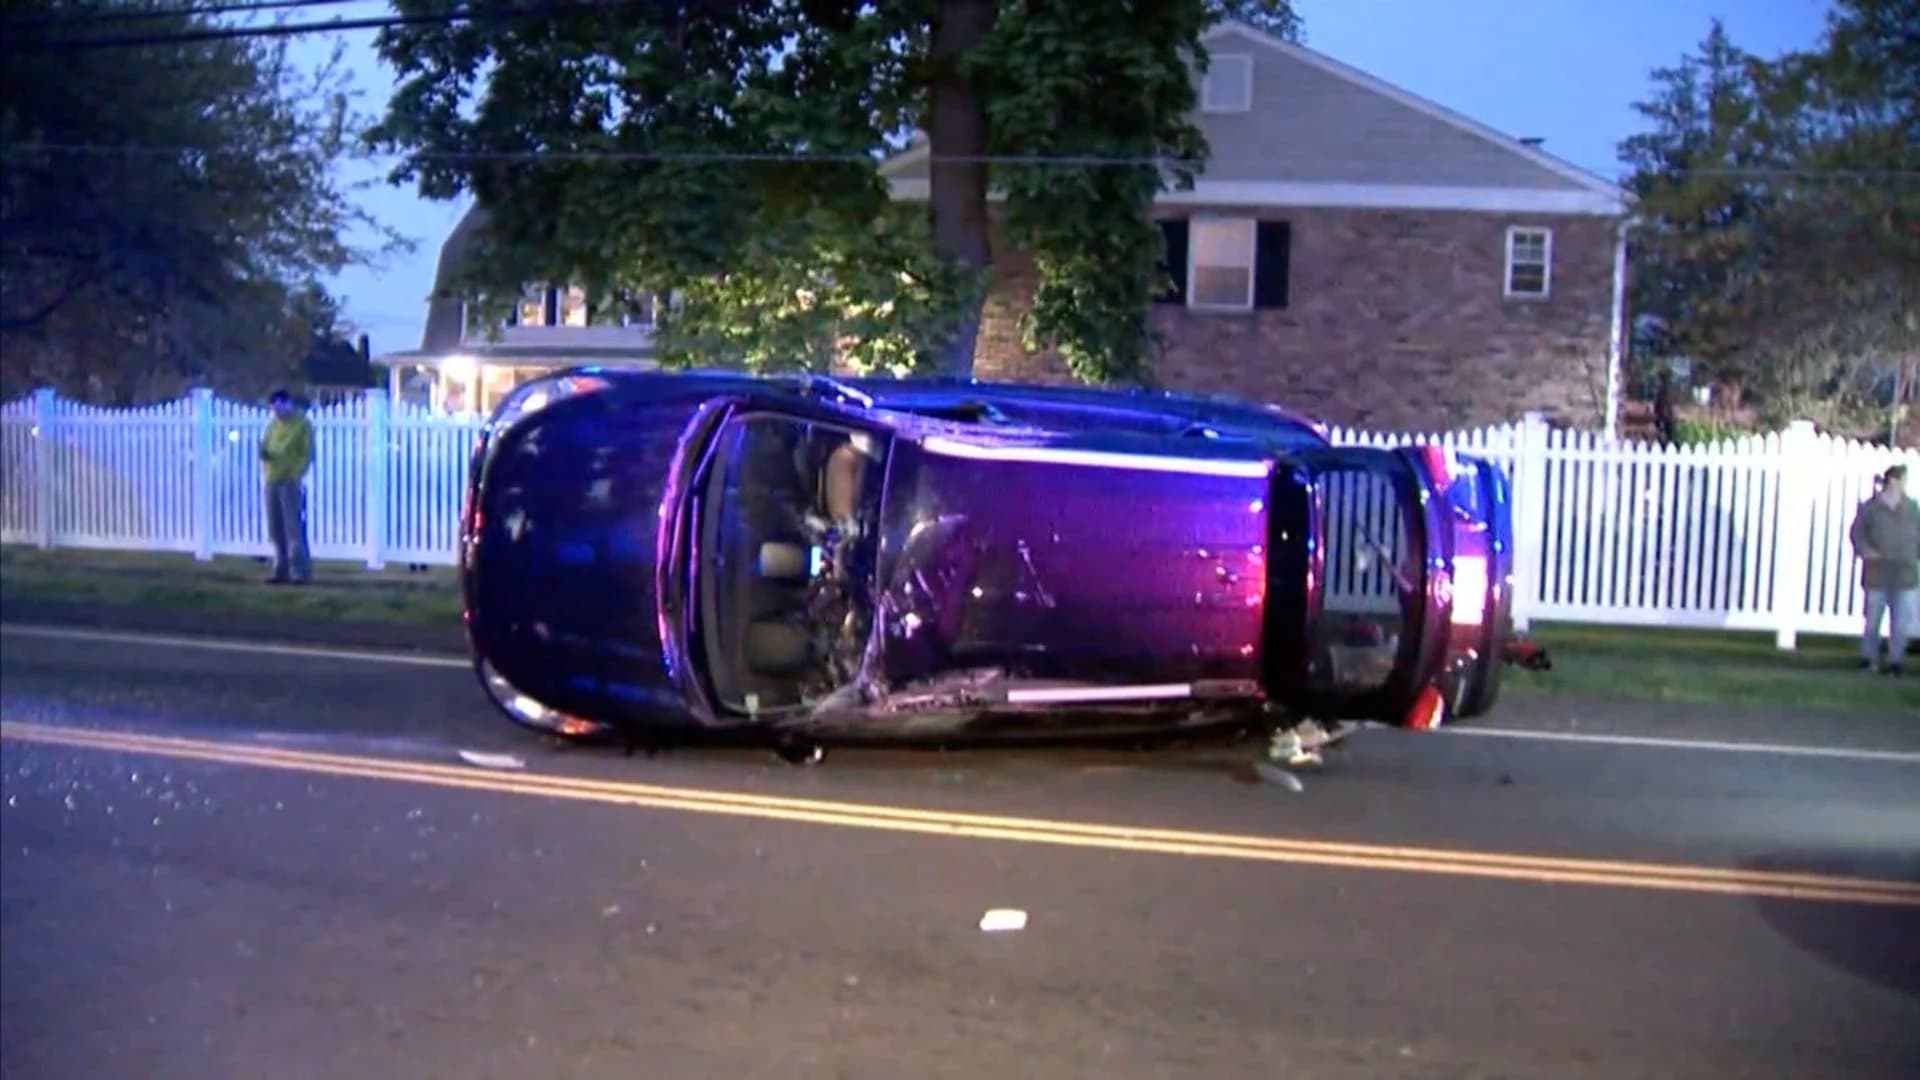 At least 3 hospitalized following 5 car accident in Stamford